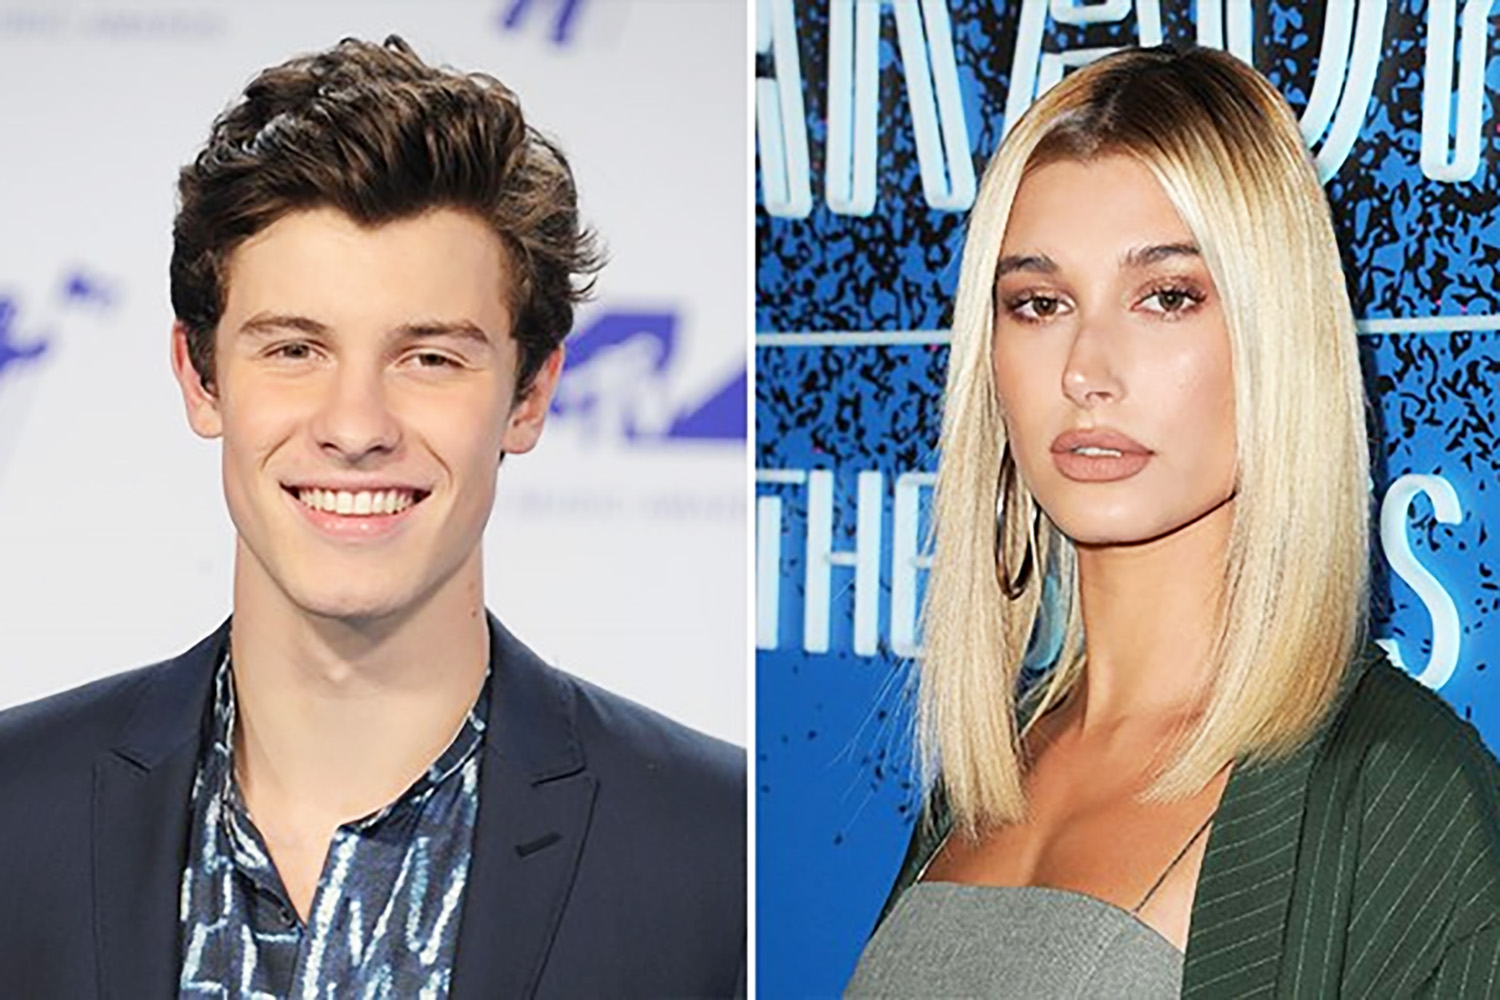 More Proof That Hailey Baldwin And Shawn Mendes Are Dating